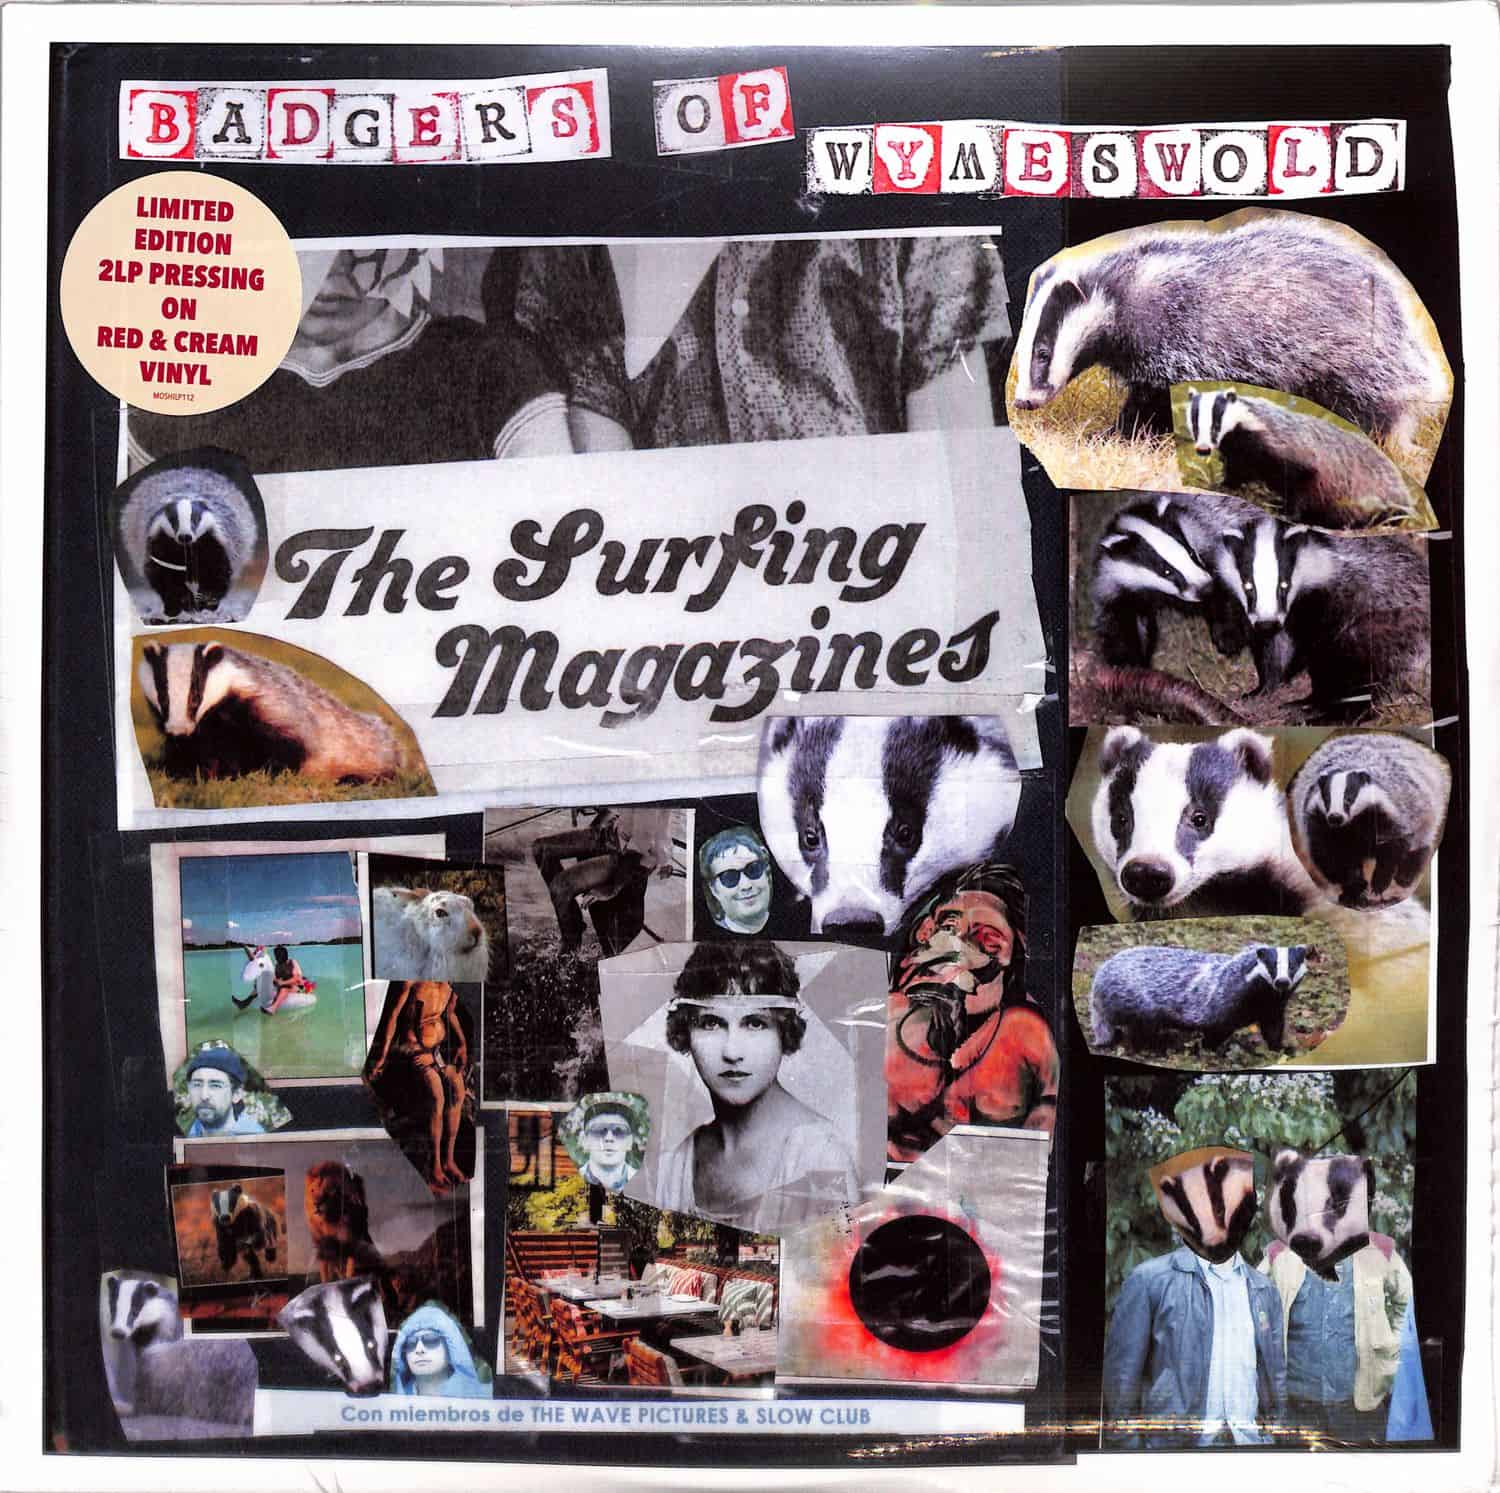 The Surfing Magazines - BADGERS OF WYMESWORD 